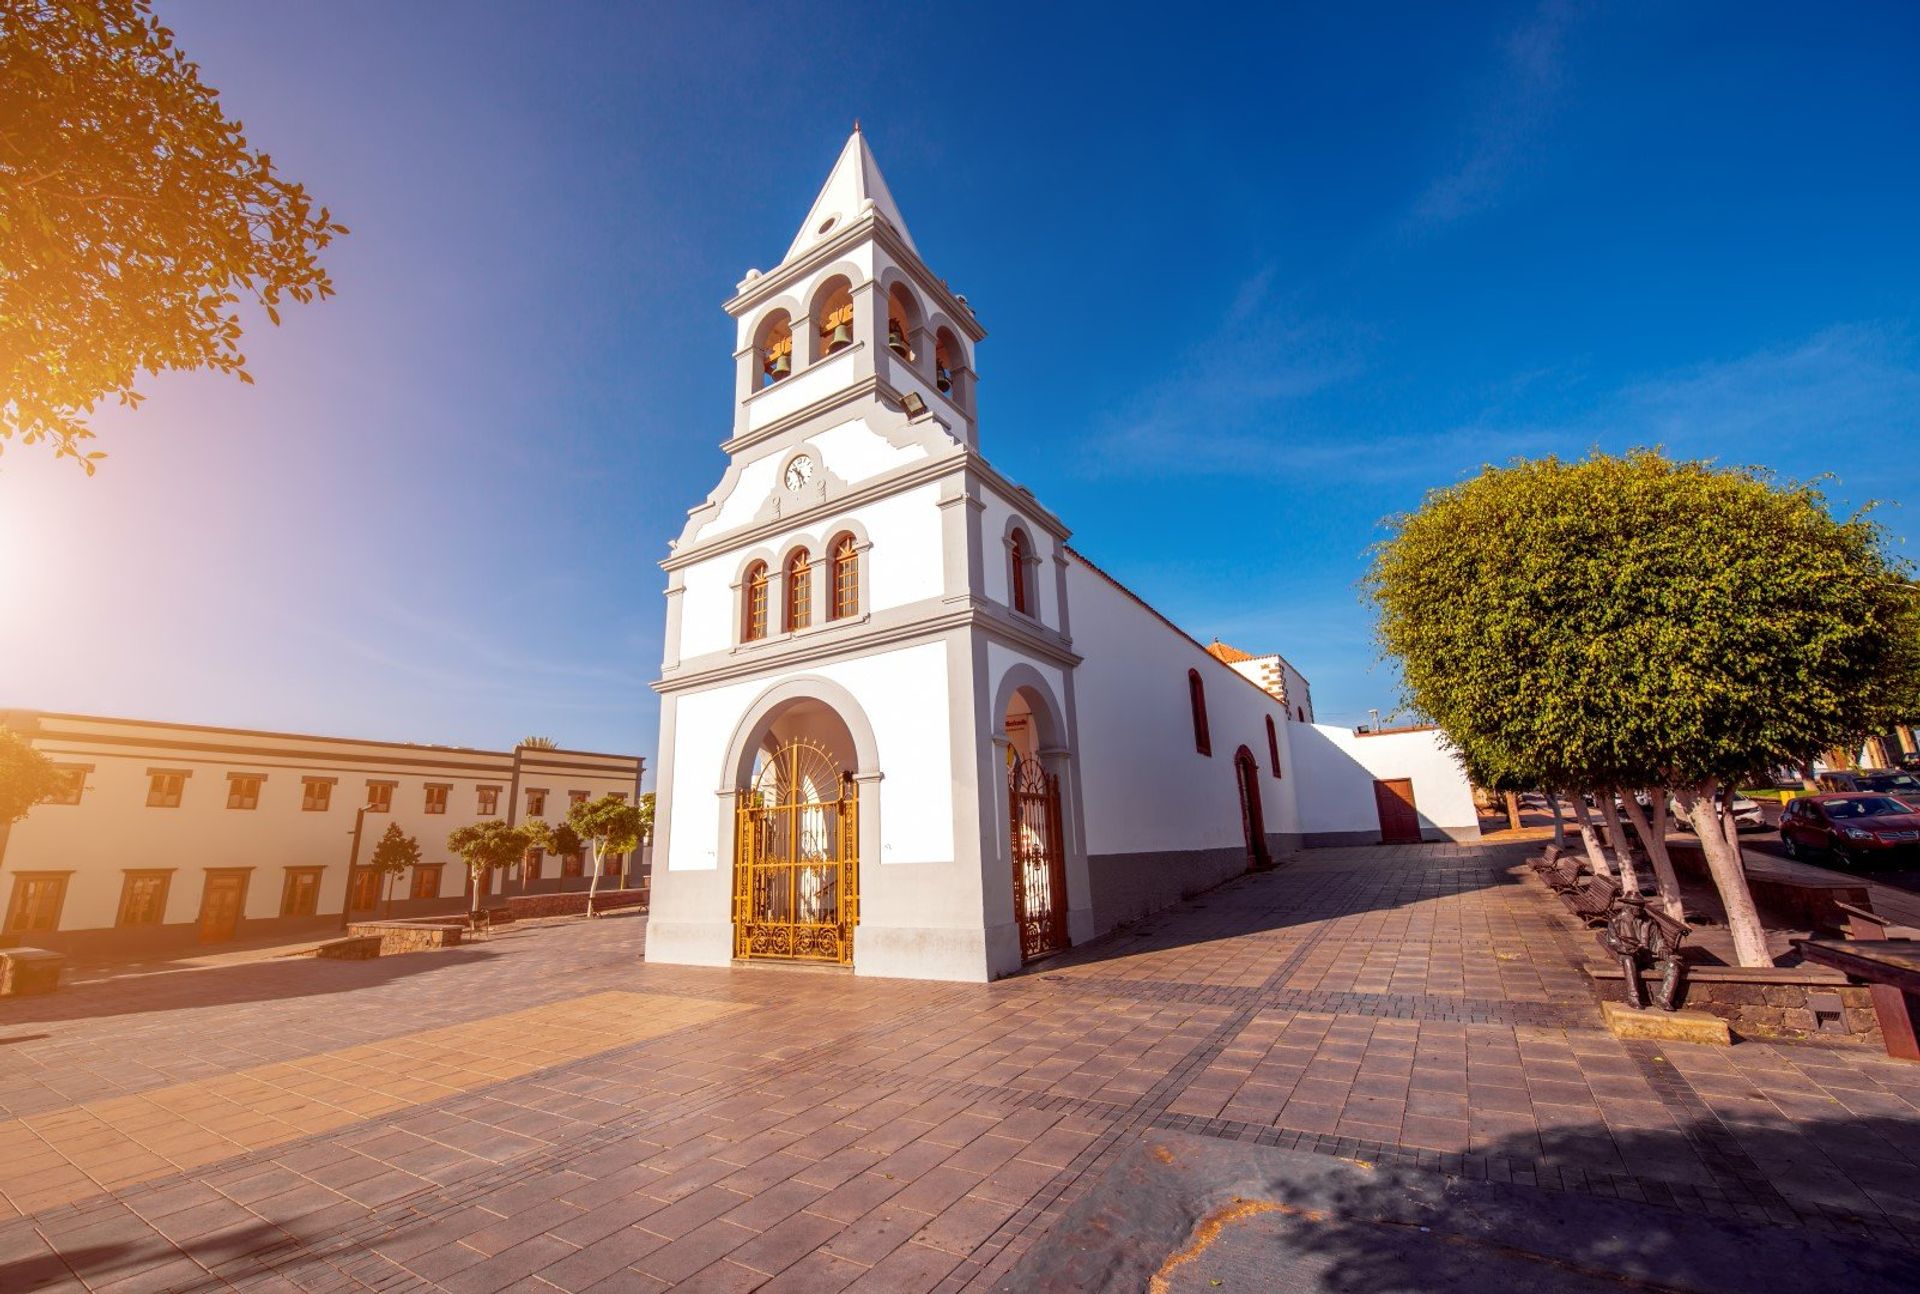 Sun-drenched Our Lady of the Rosary Church in Fuerteventura's capital, Puerto del Rosario